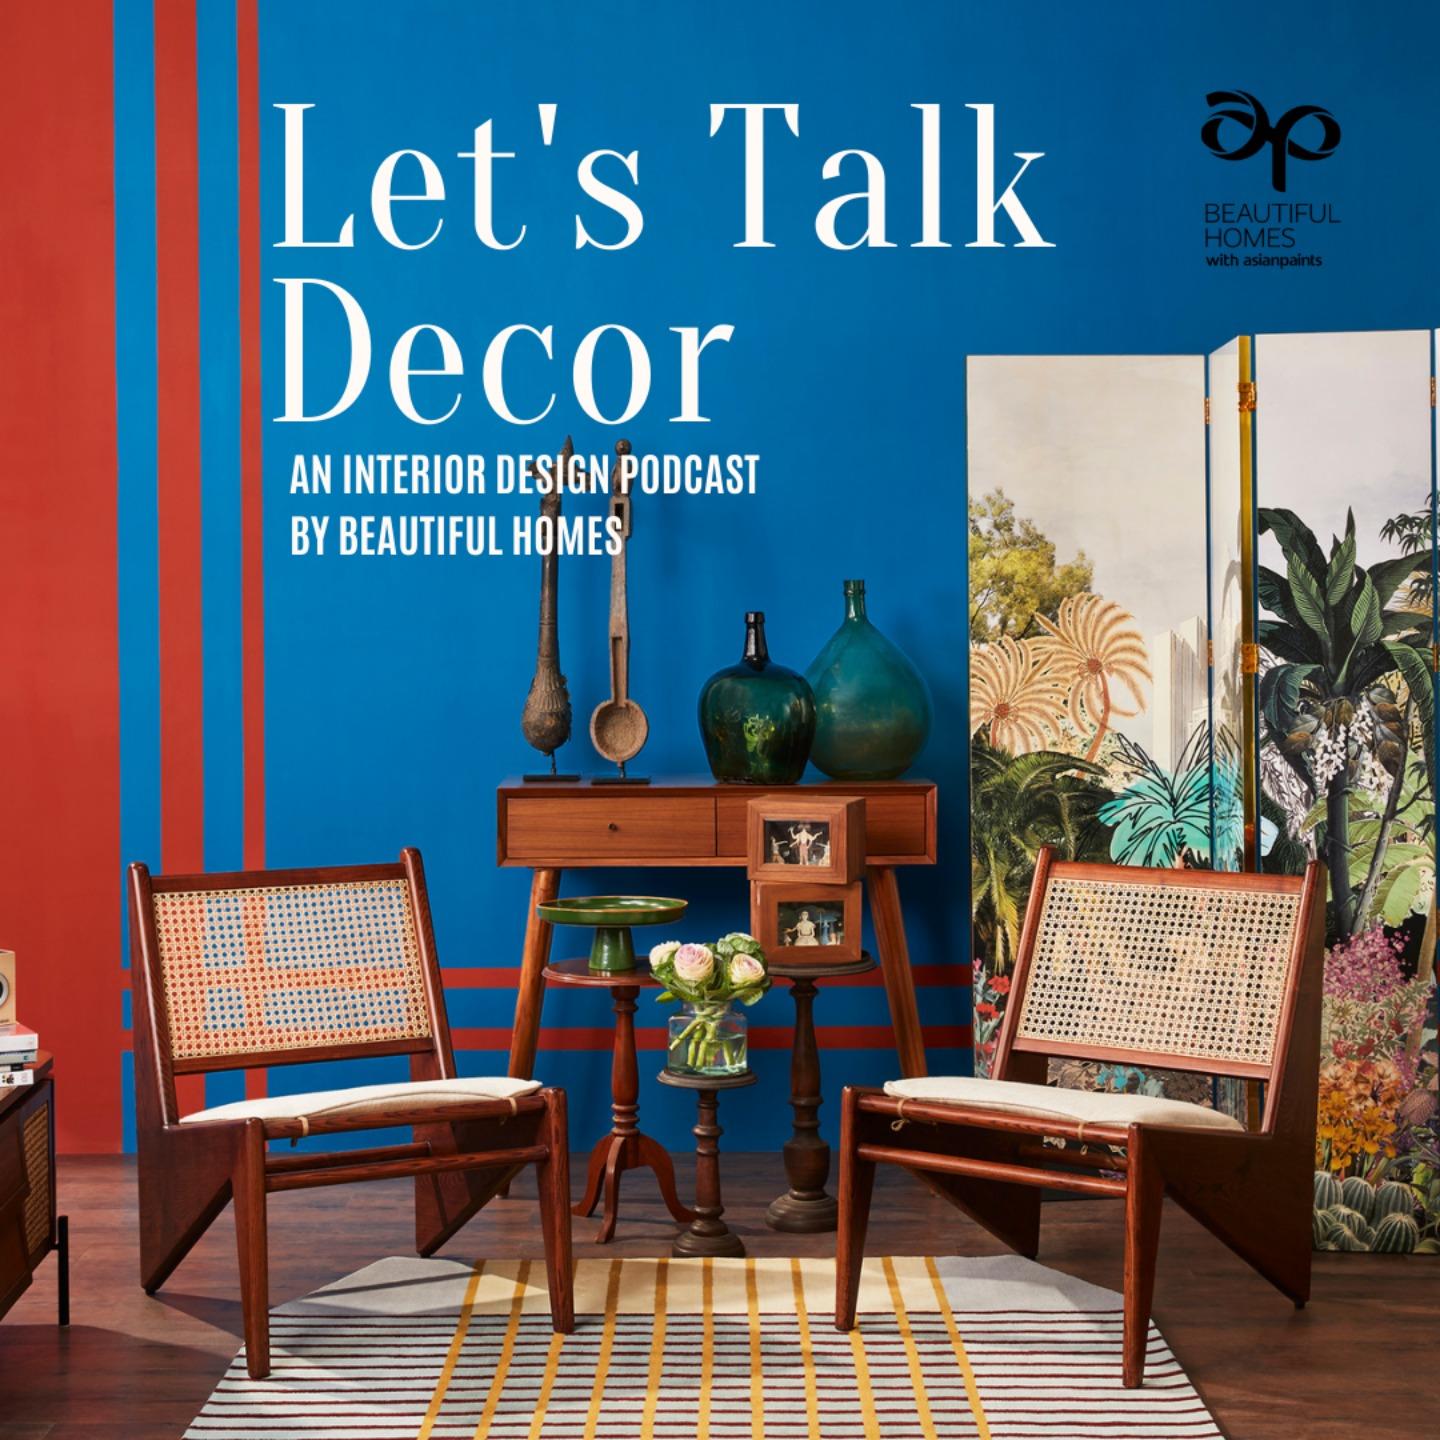 Let's talk Decor by Beautiful Homes